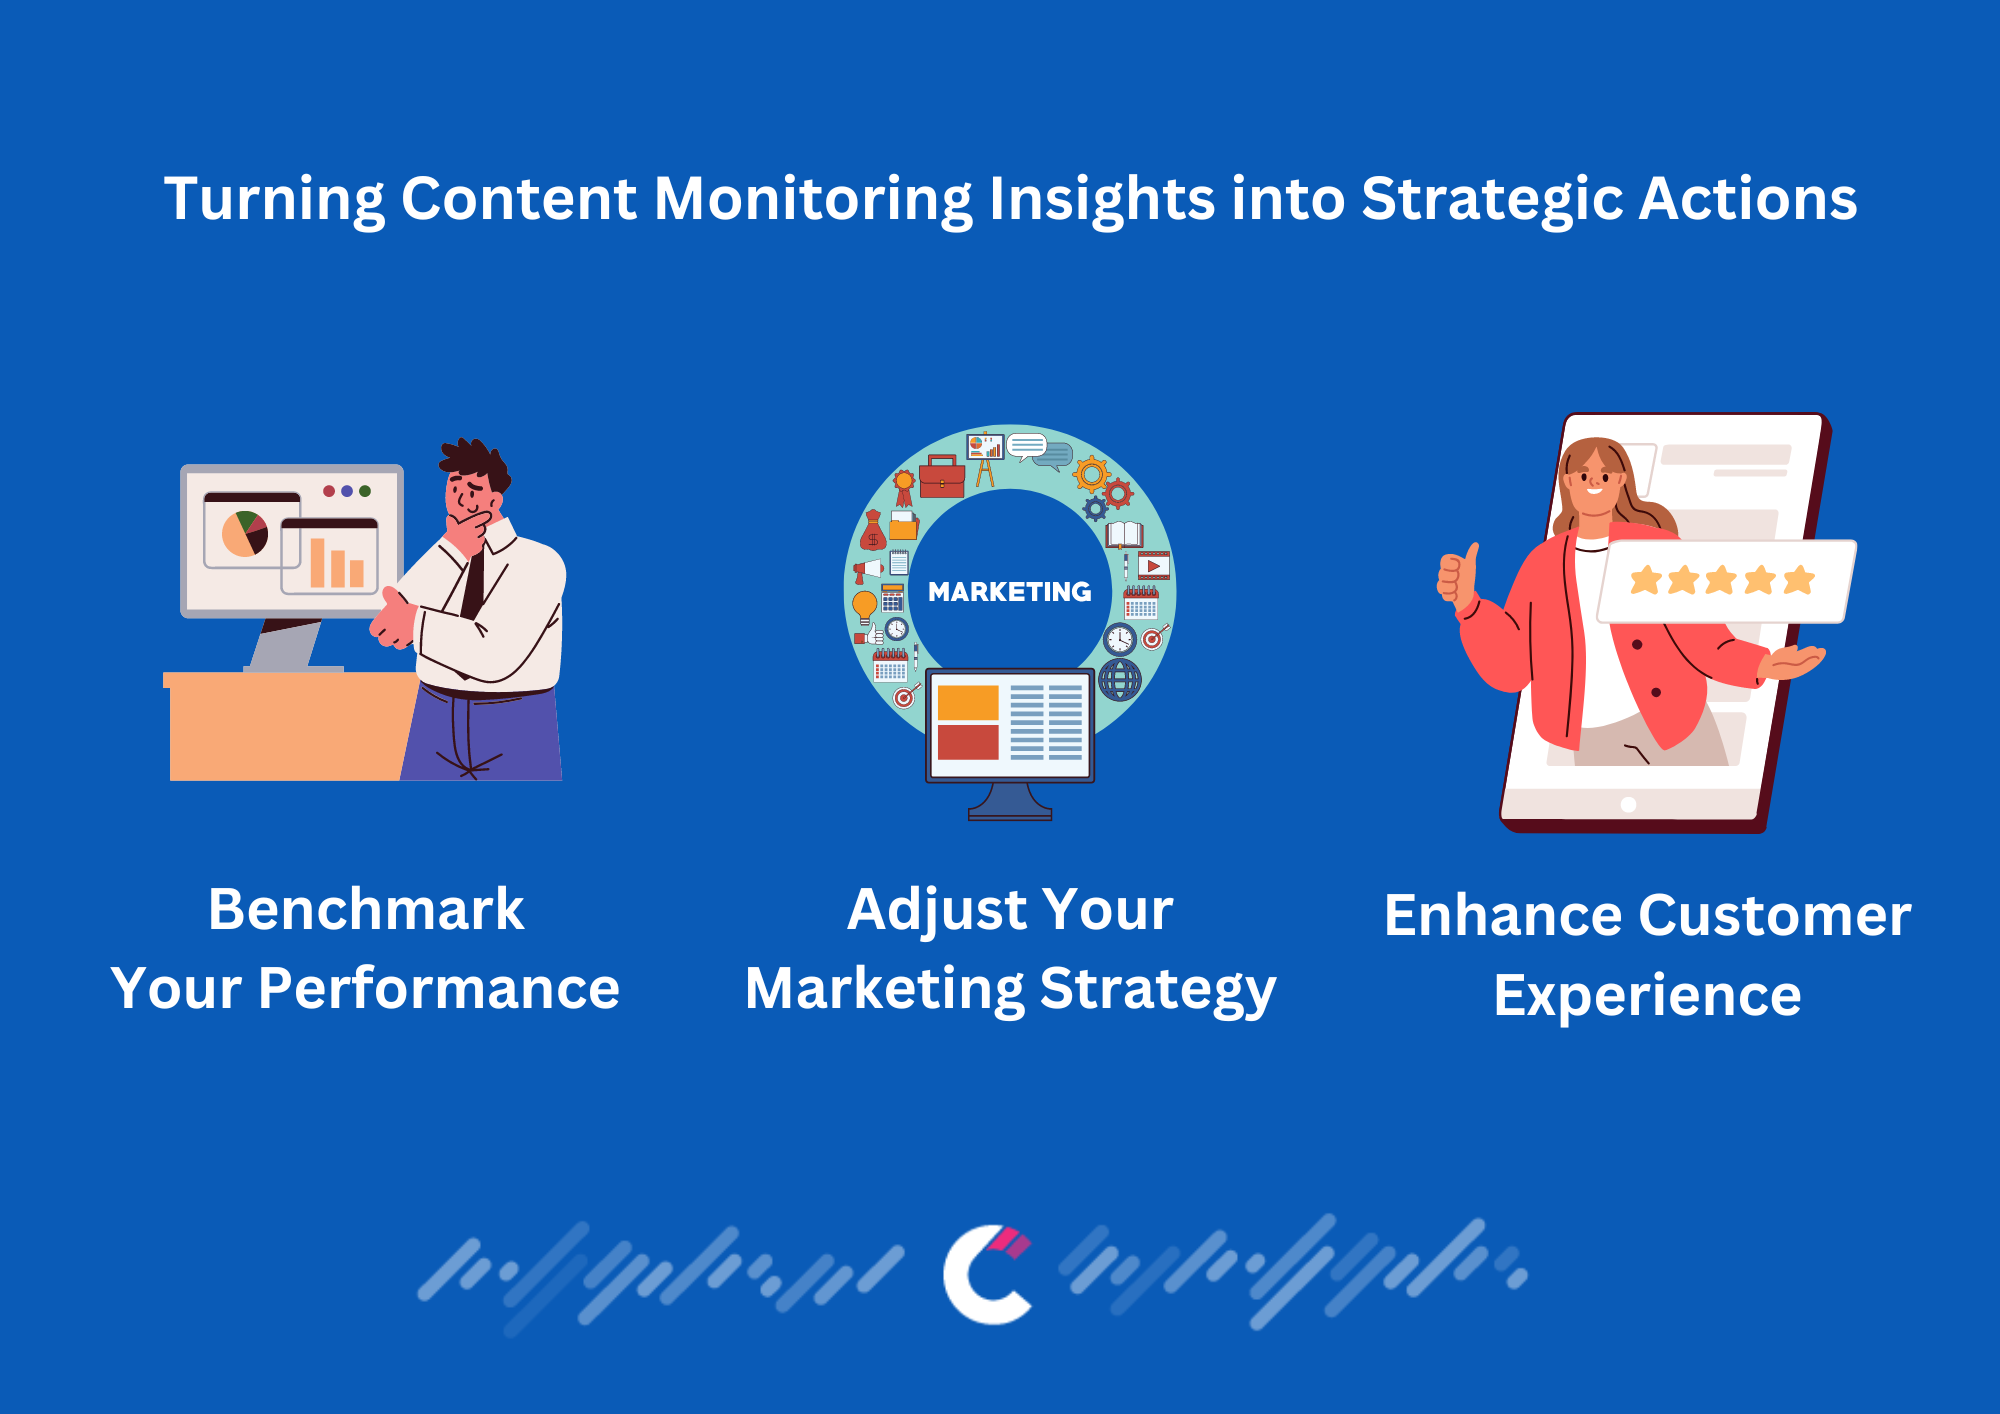 Turning Content Monitoring Insights into Strategic Actions